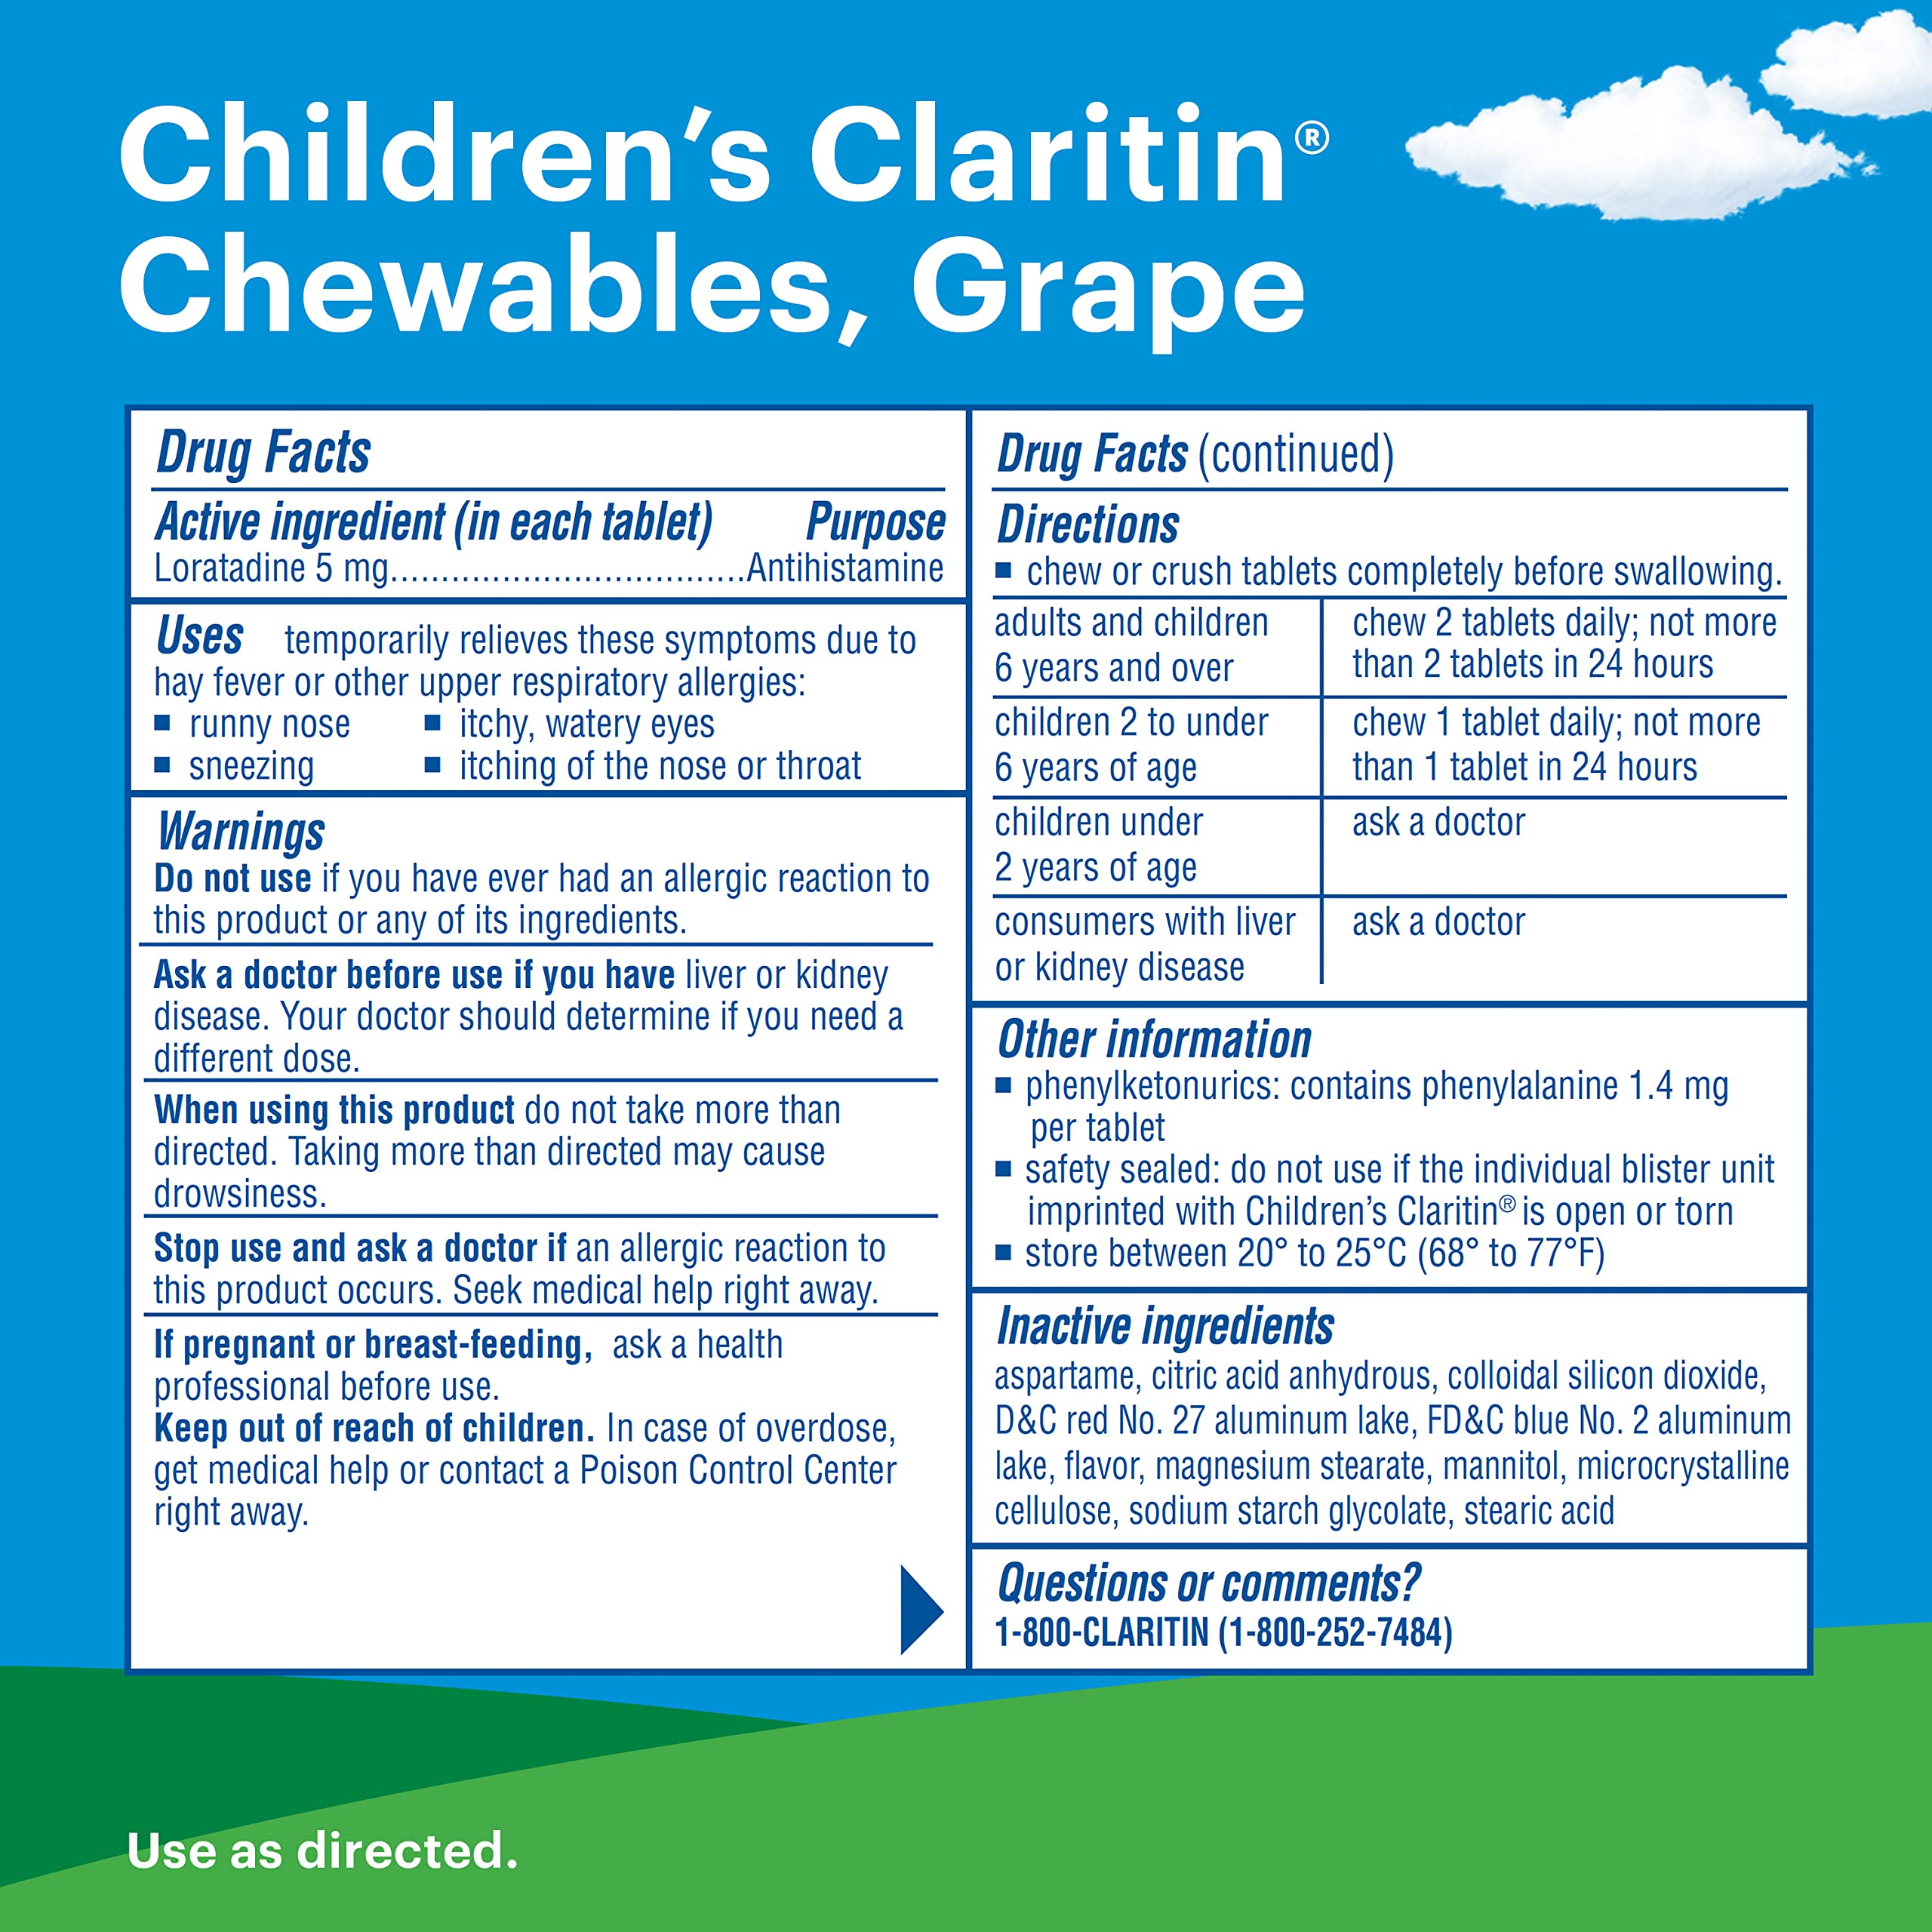 Children's Claritin Chewables 24 Hour Allergy Relief, Non Drowsy Kids Allergy Medicine, Grape Antihistamine Chewable Tablets, For Children 2 Years and Older, 40 Count